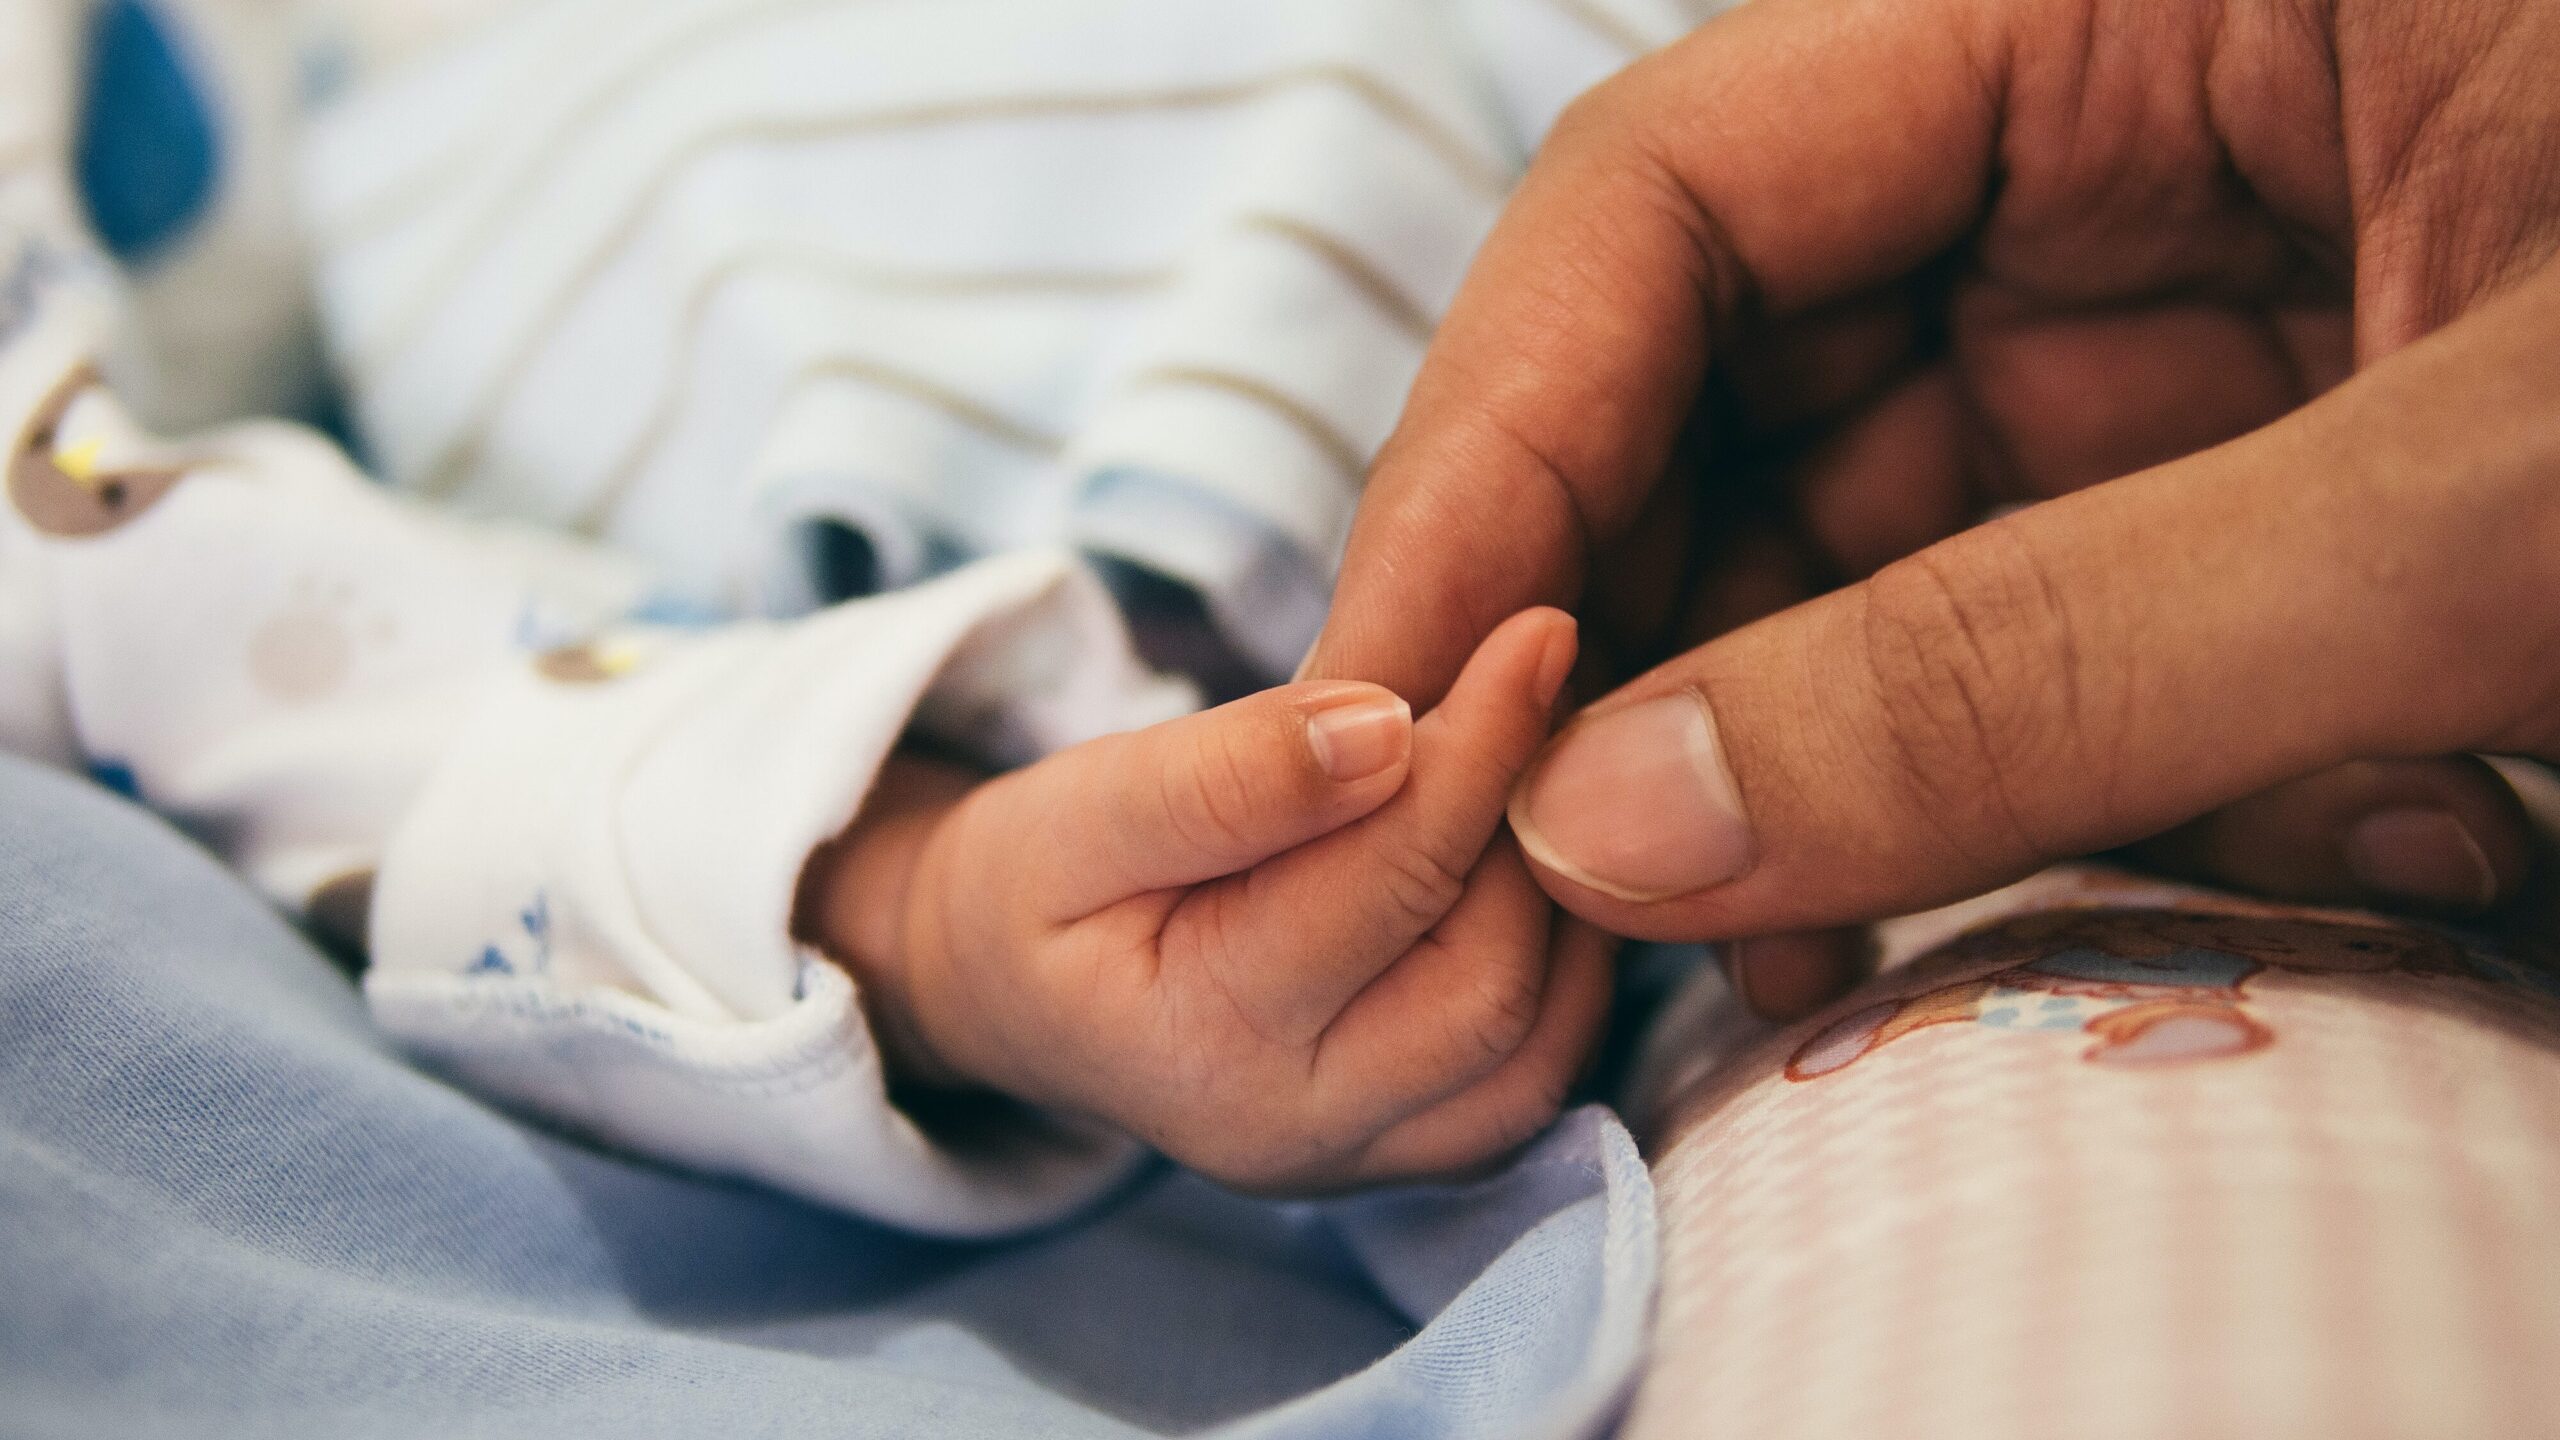 lose up of an adult hand holding the fingers of a small baby’s hand. Both people have a lighter skin tone, the baby is has a long white patterned sleeve and there are blankets in white, blue and peach.